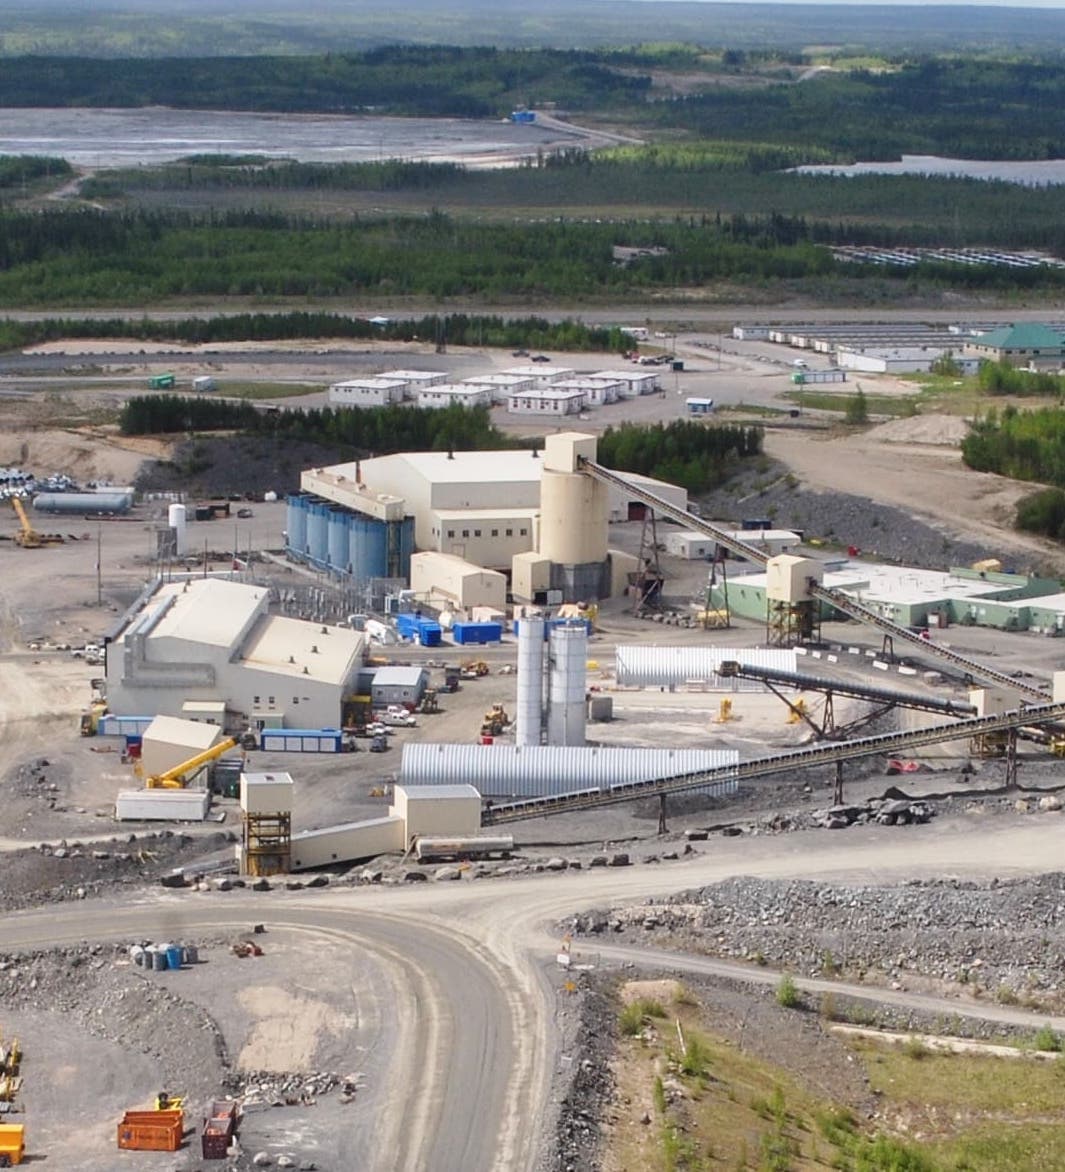 Facilities at a Large Goldcorp Mining Site in Northern Ontario